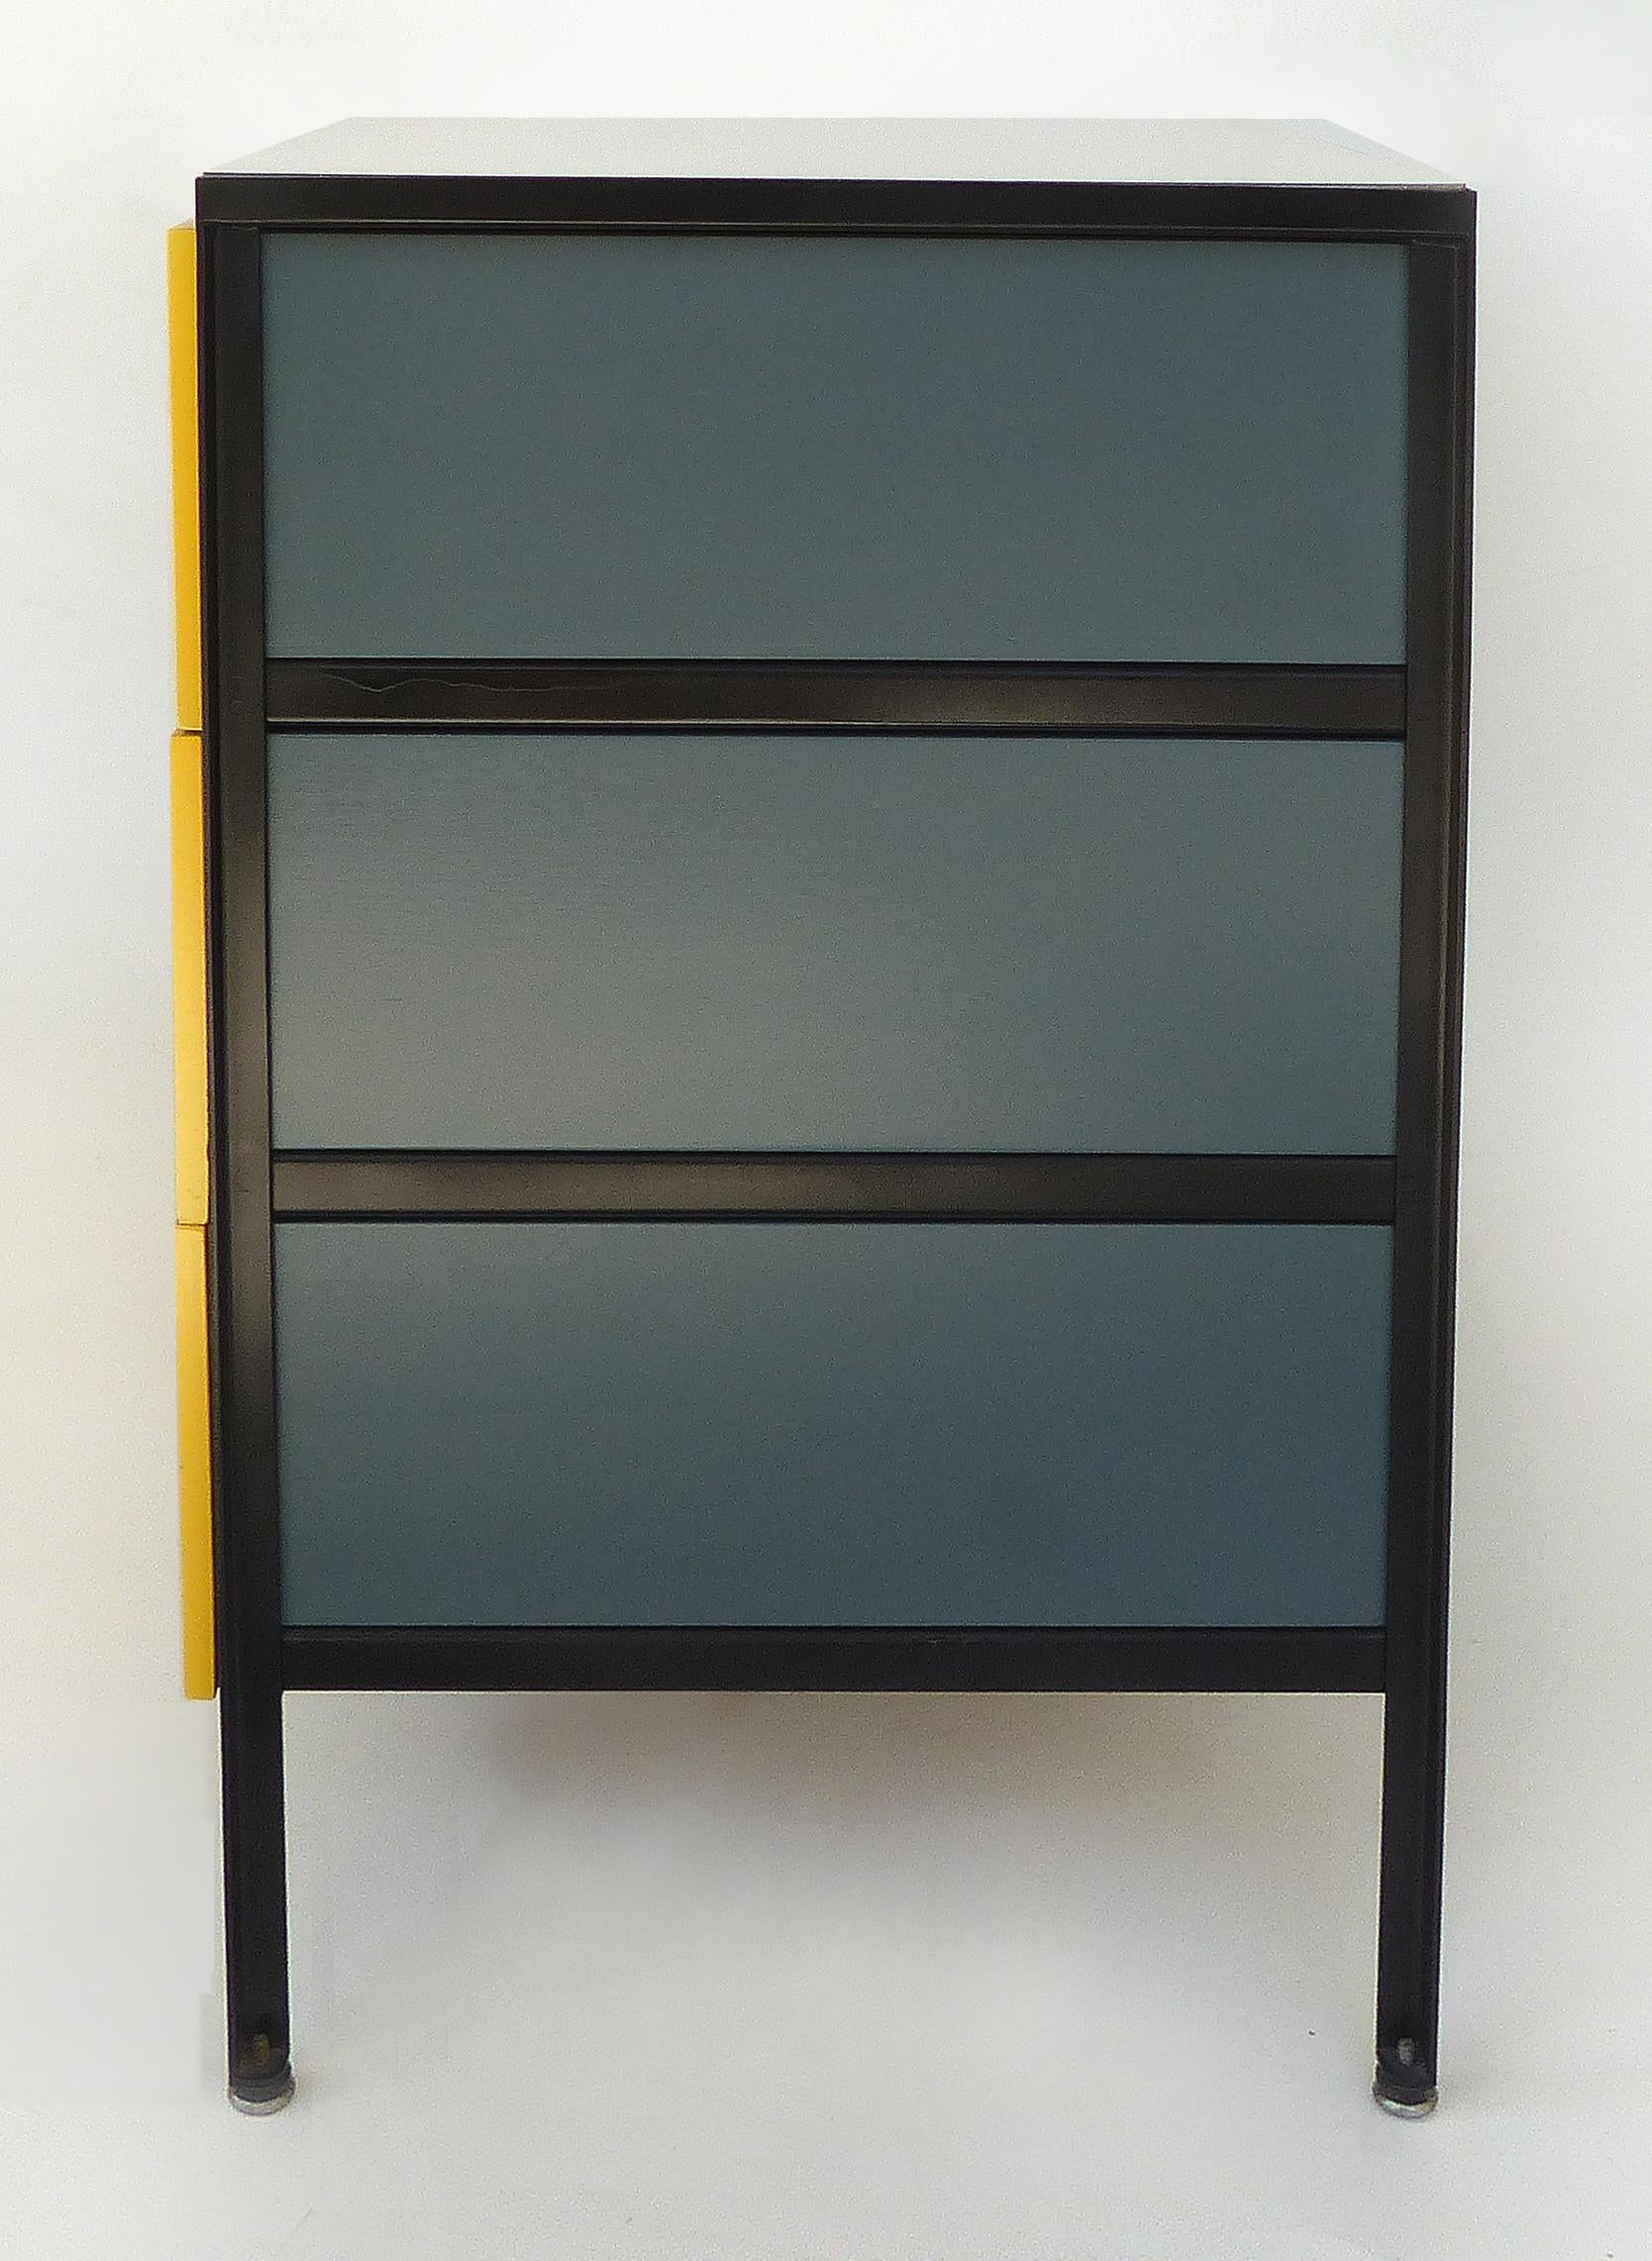 George Nelson Herman Miller Mid-century Modern Steel  Frame Chests of Drawers 2